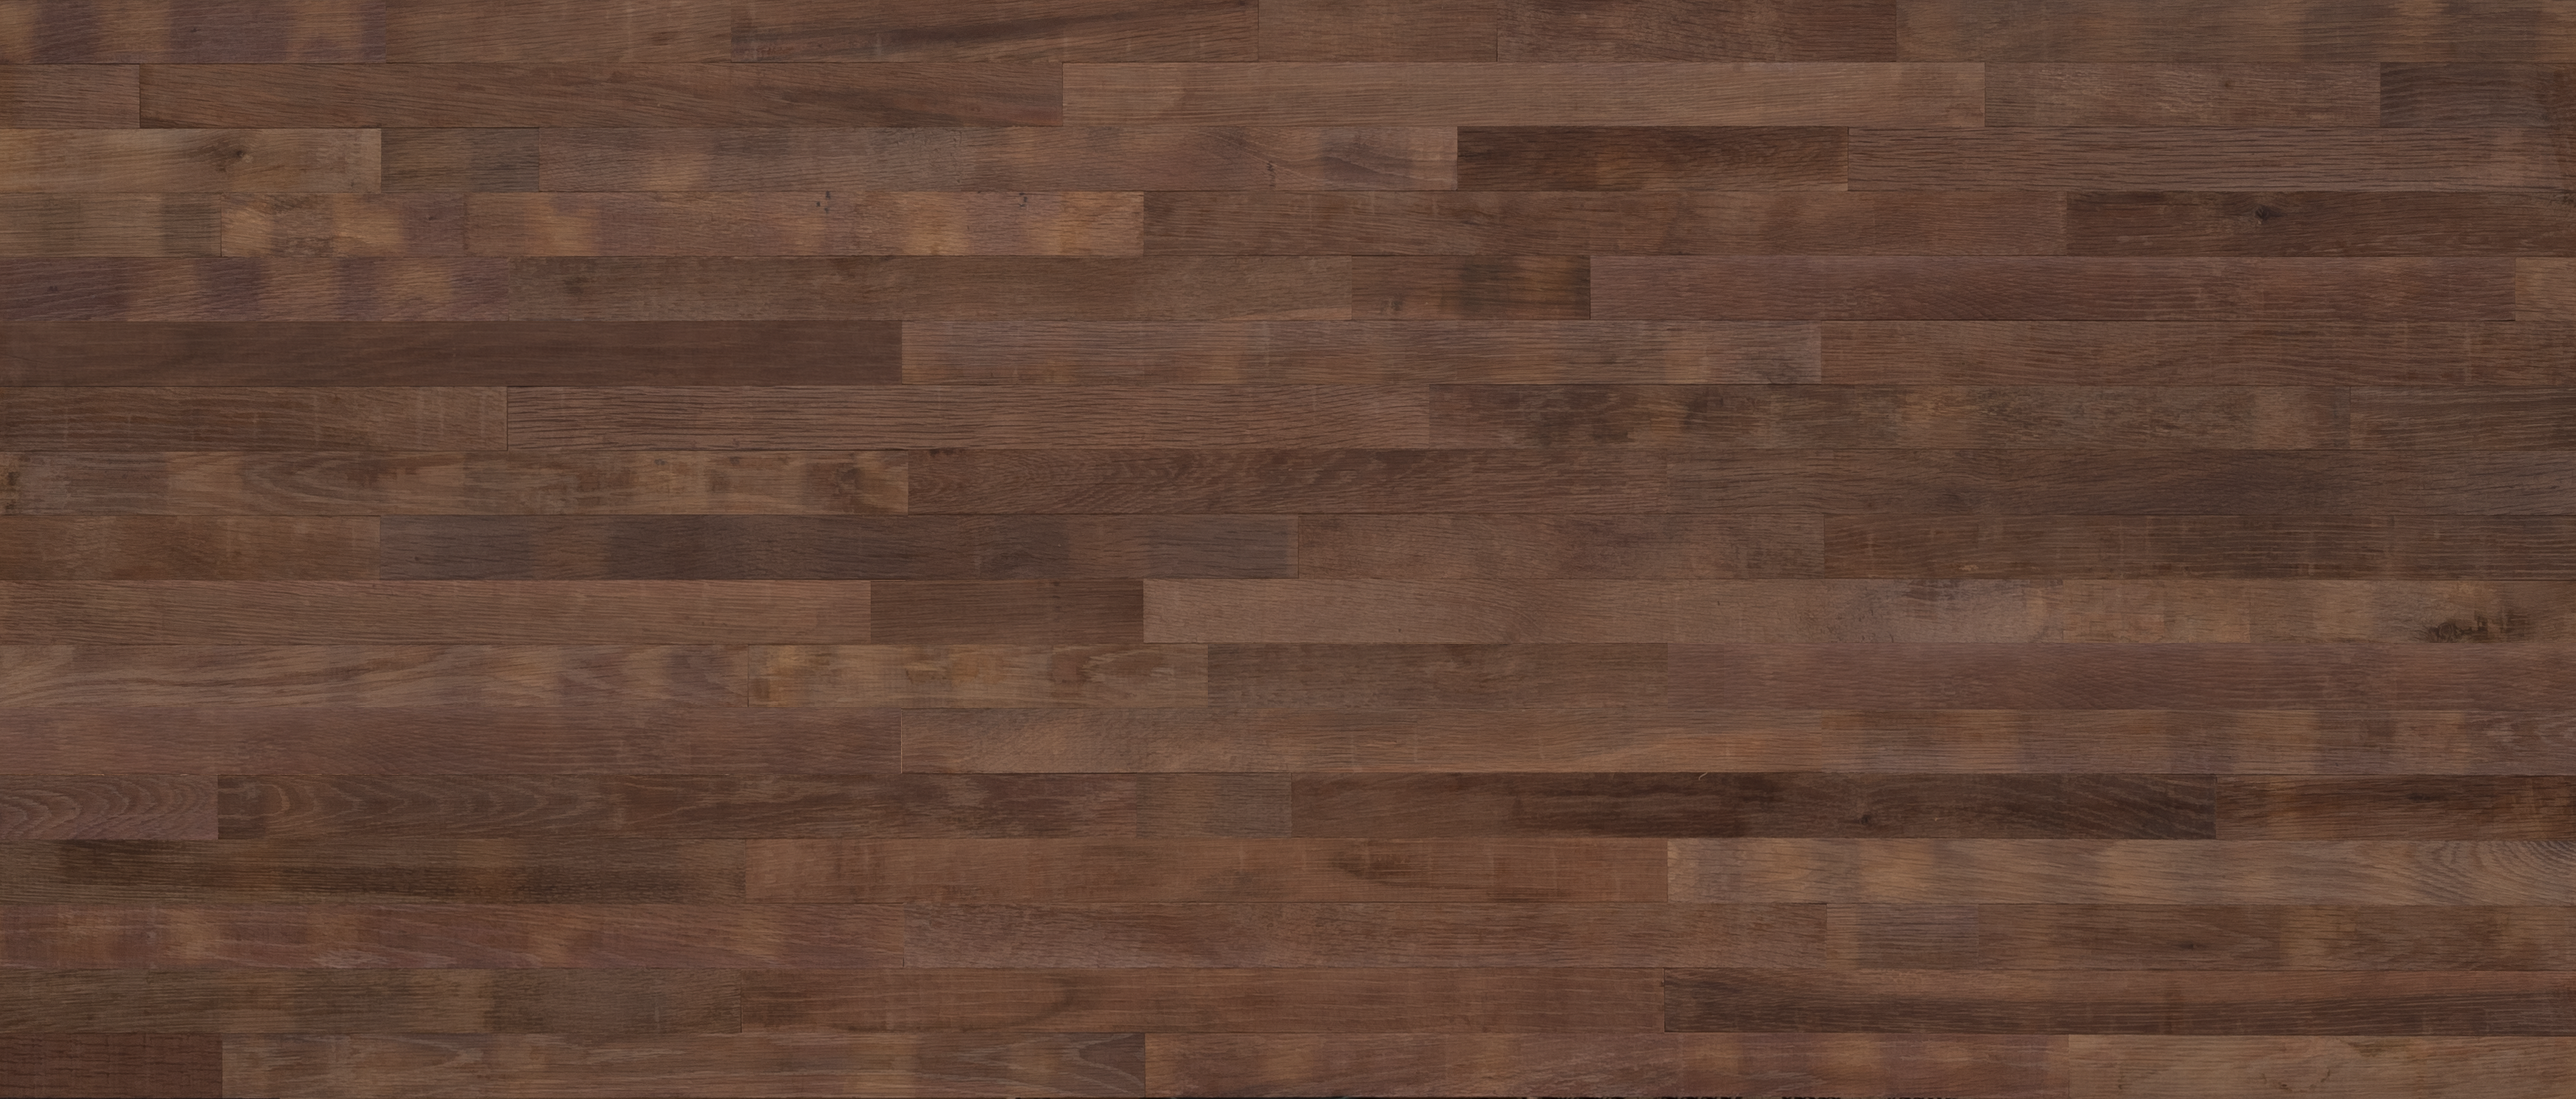 Stikwood Reclaimed Barrel Oak material explorer | reclaimed french oak peel and stick wood wall and ceiling planks with natural brown and purple color patina.